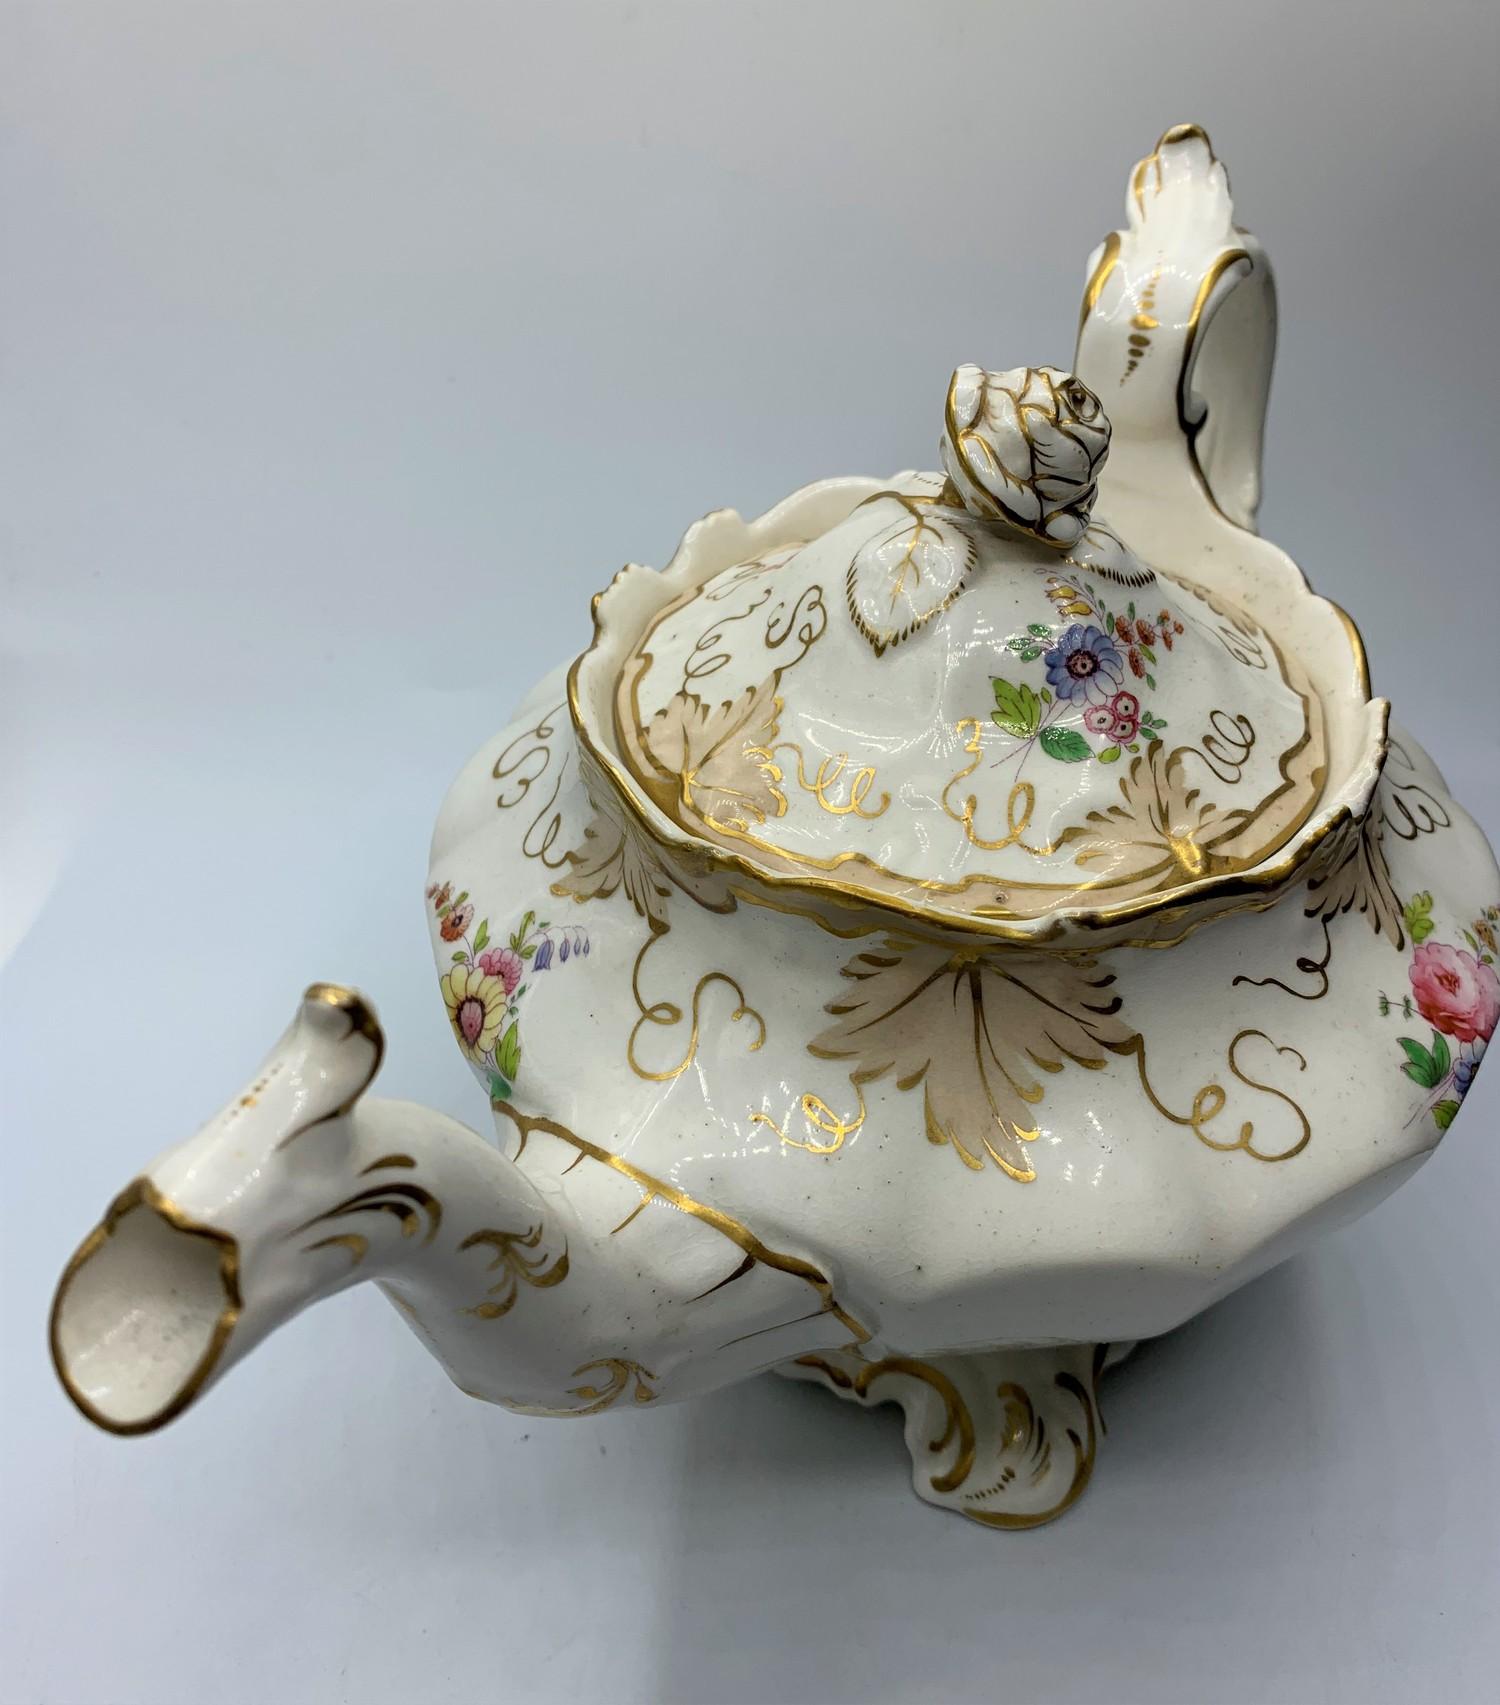 H&R Daniel Bath shape Teapot with Floral theme in good condition - Image 3 of 8